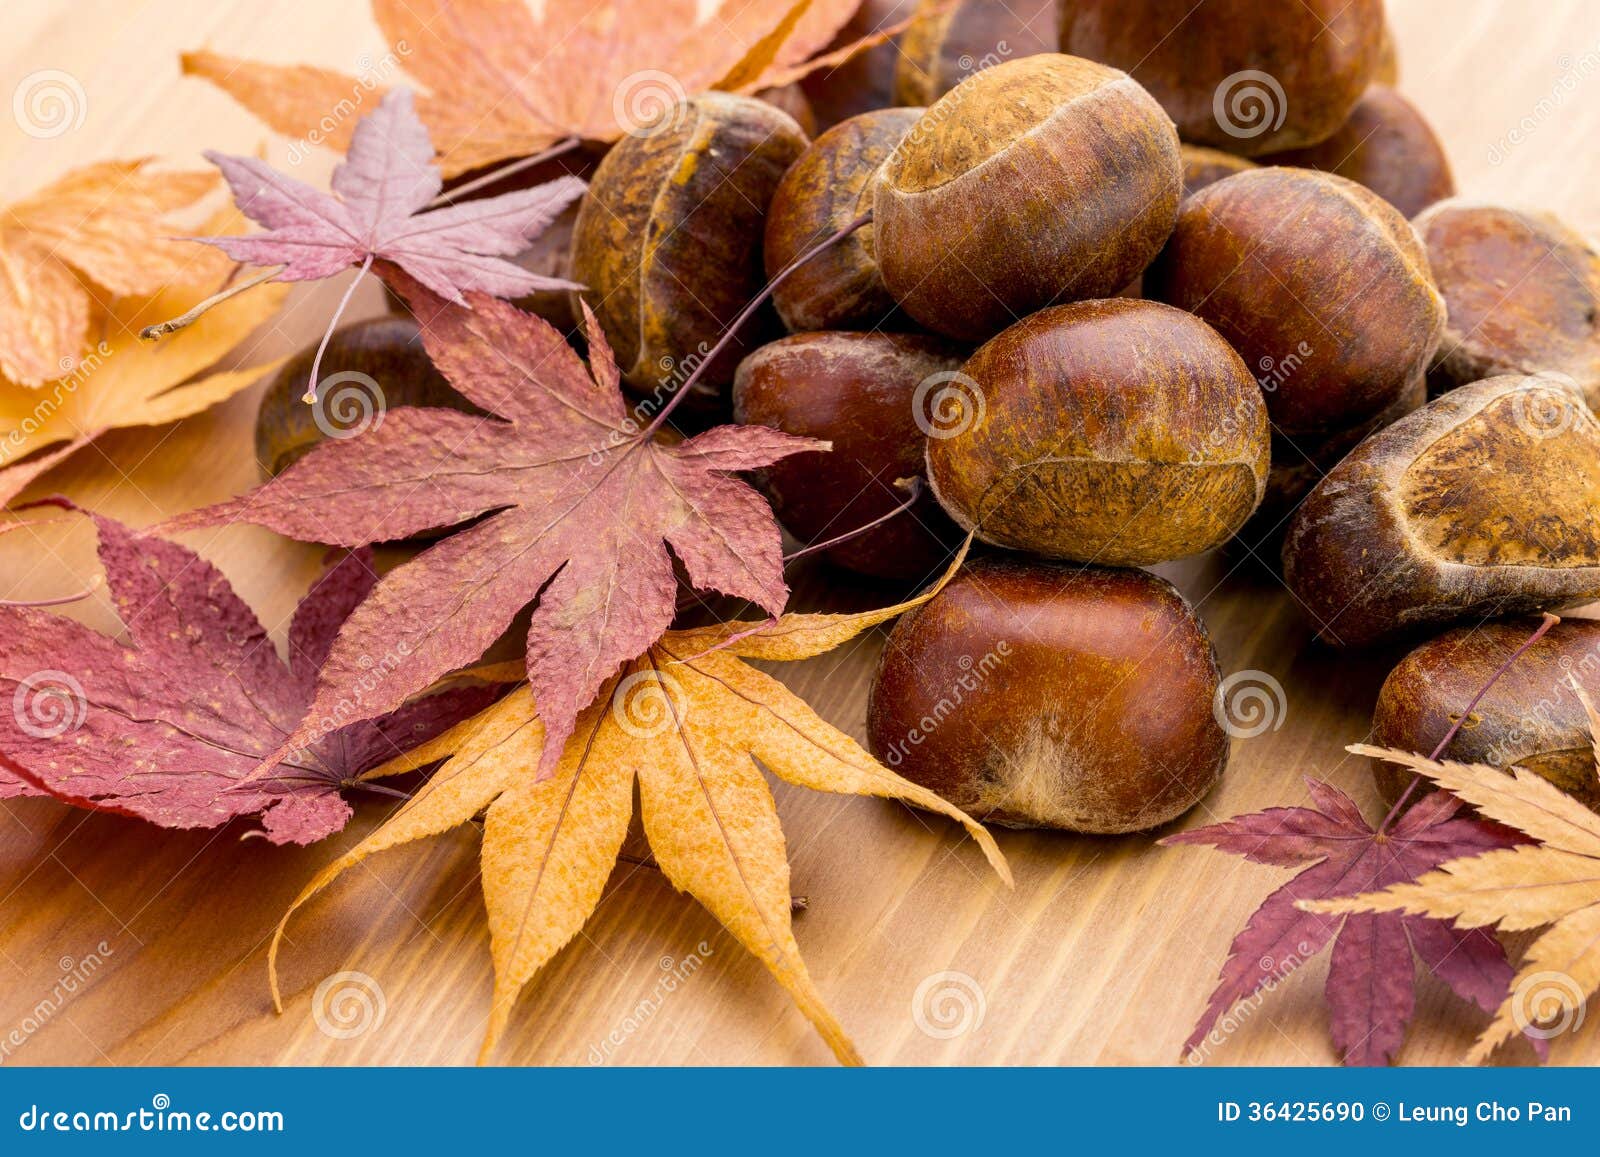 Chestnut and Dry Maple Leave Stock Photo - Image of chestnut, group